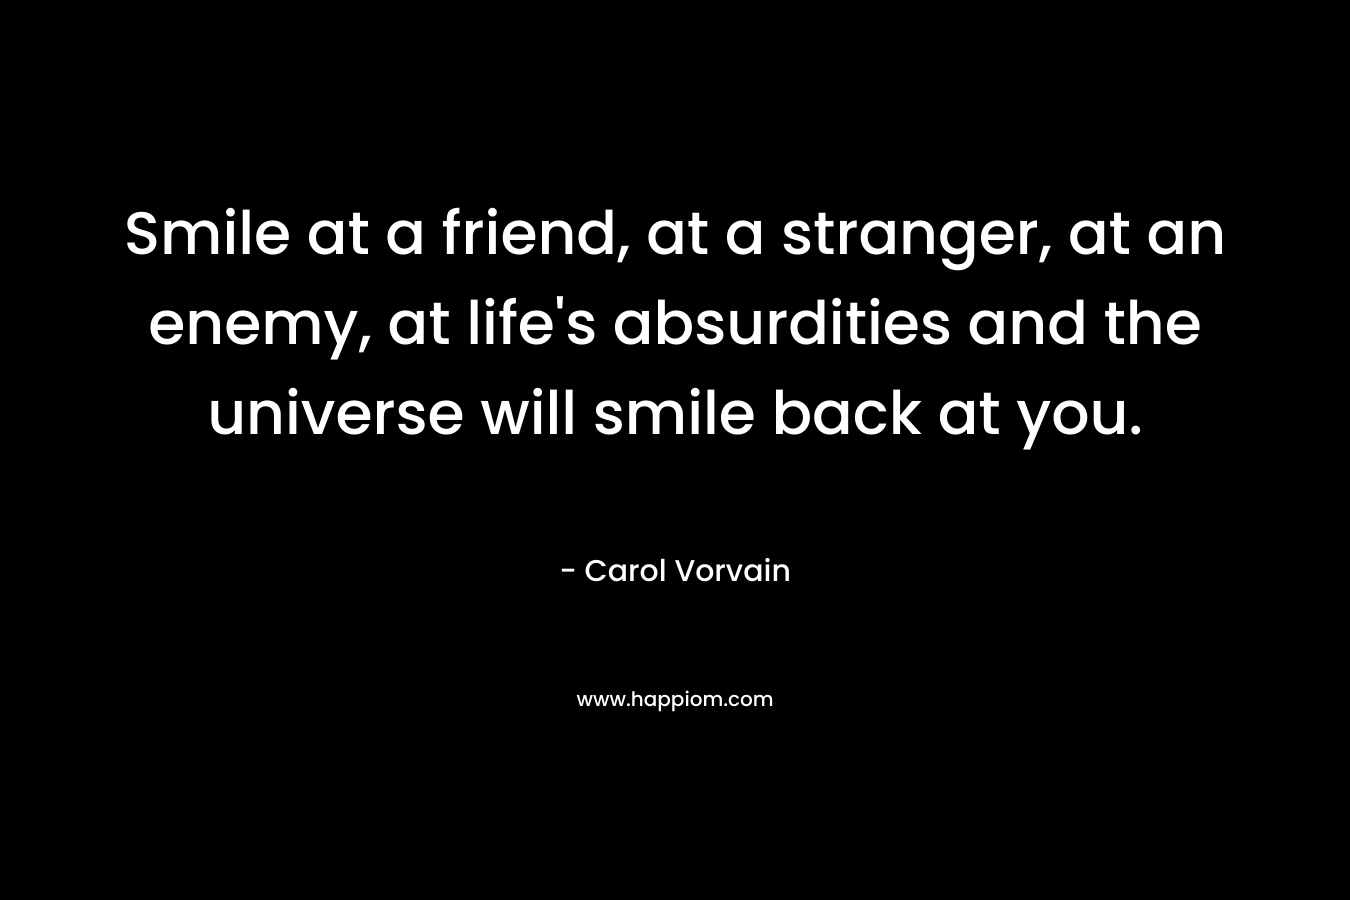 Smile at a friend, at a stranger, at an enemy, at life's absurdities and the universe will smile back at you.